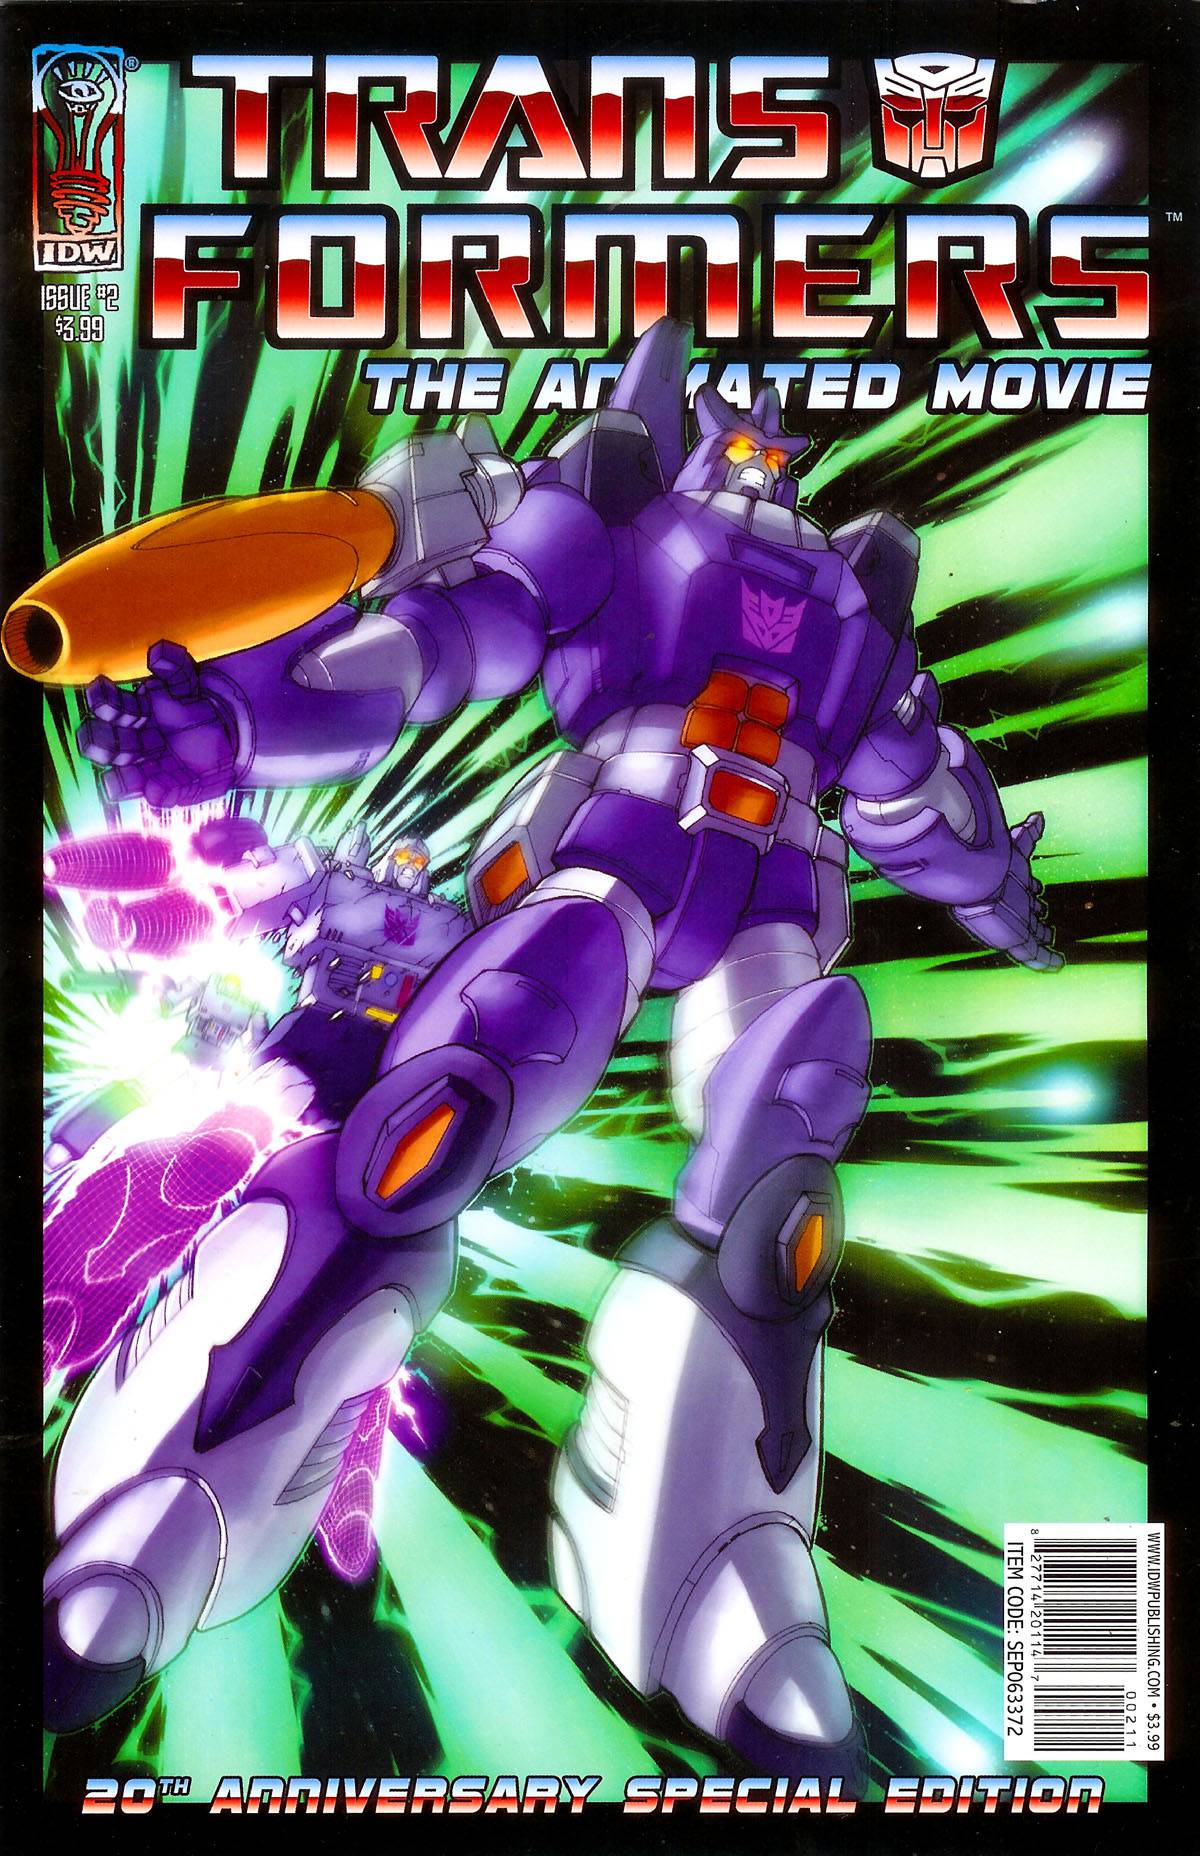 Transformers The Animated Movie #2